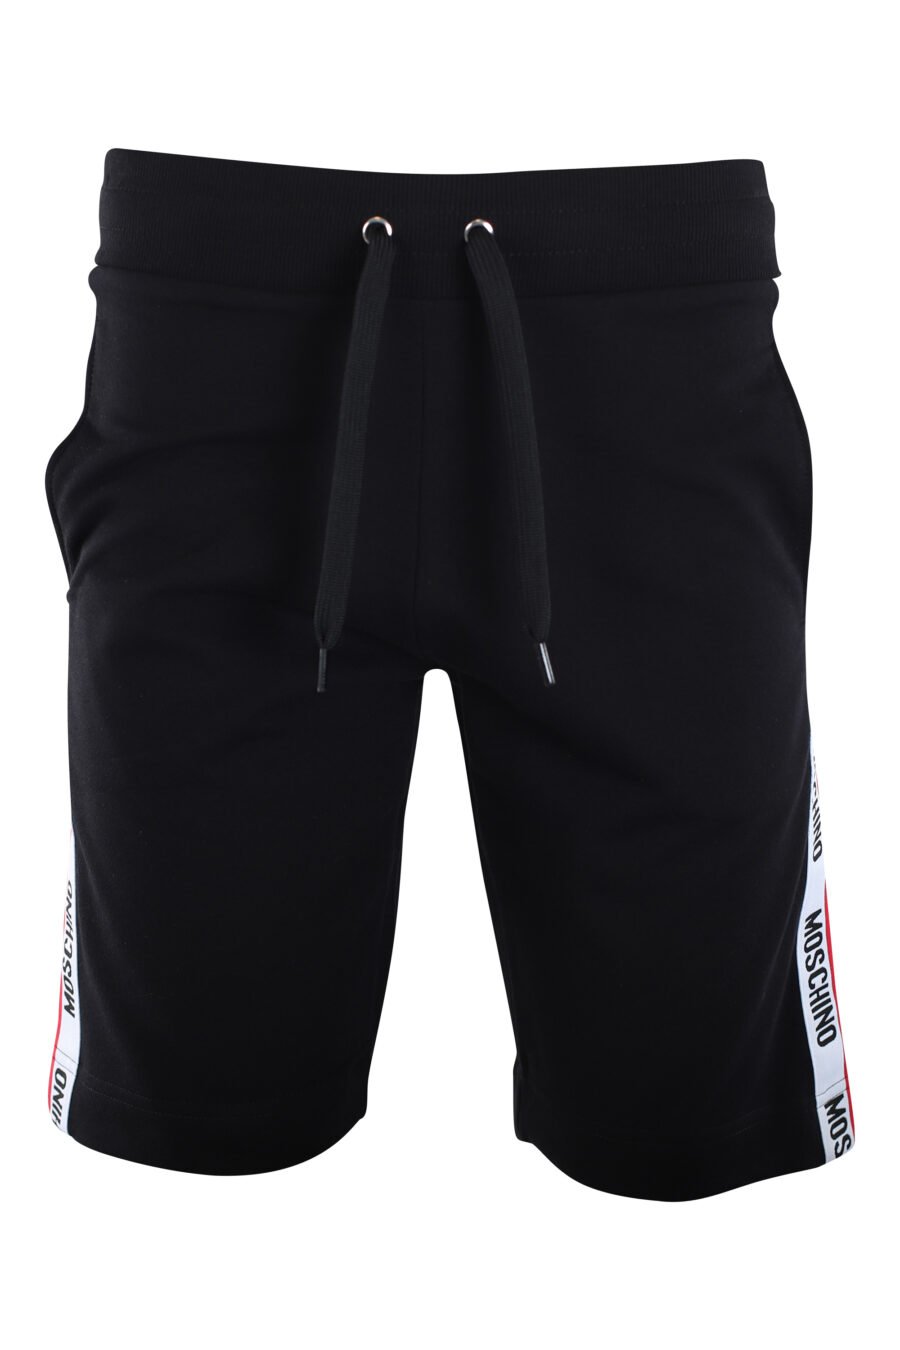 Tracksuit bottoms black with logo on side bands - IMG 2234